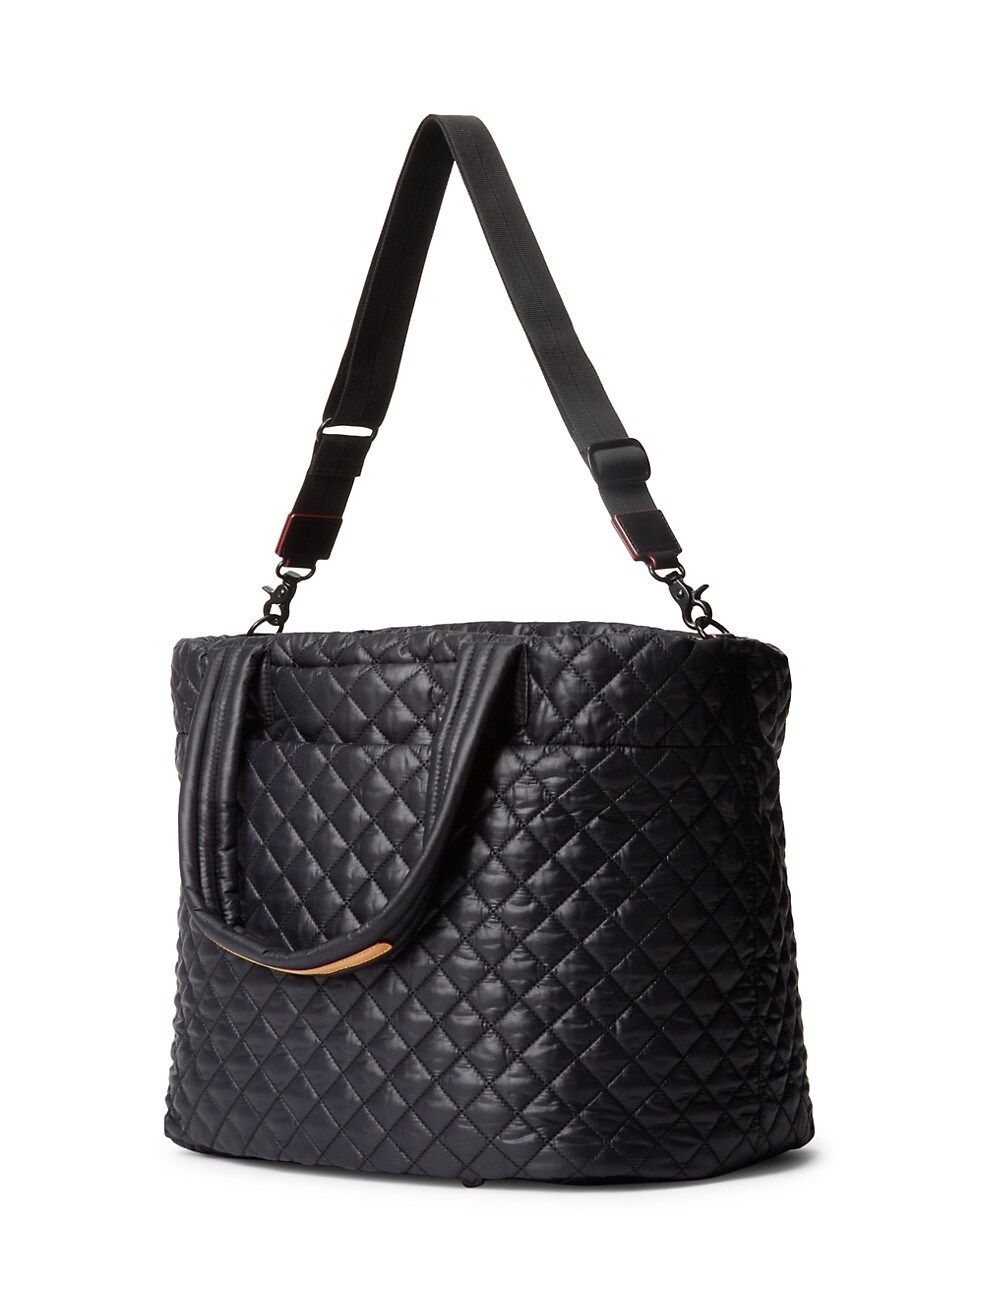 MZ Wallace Large Metro Tote Deluxe | Saks Fifth Avenue